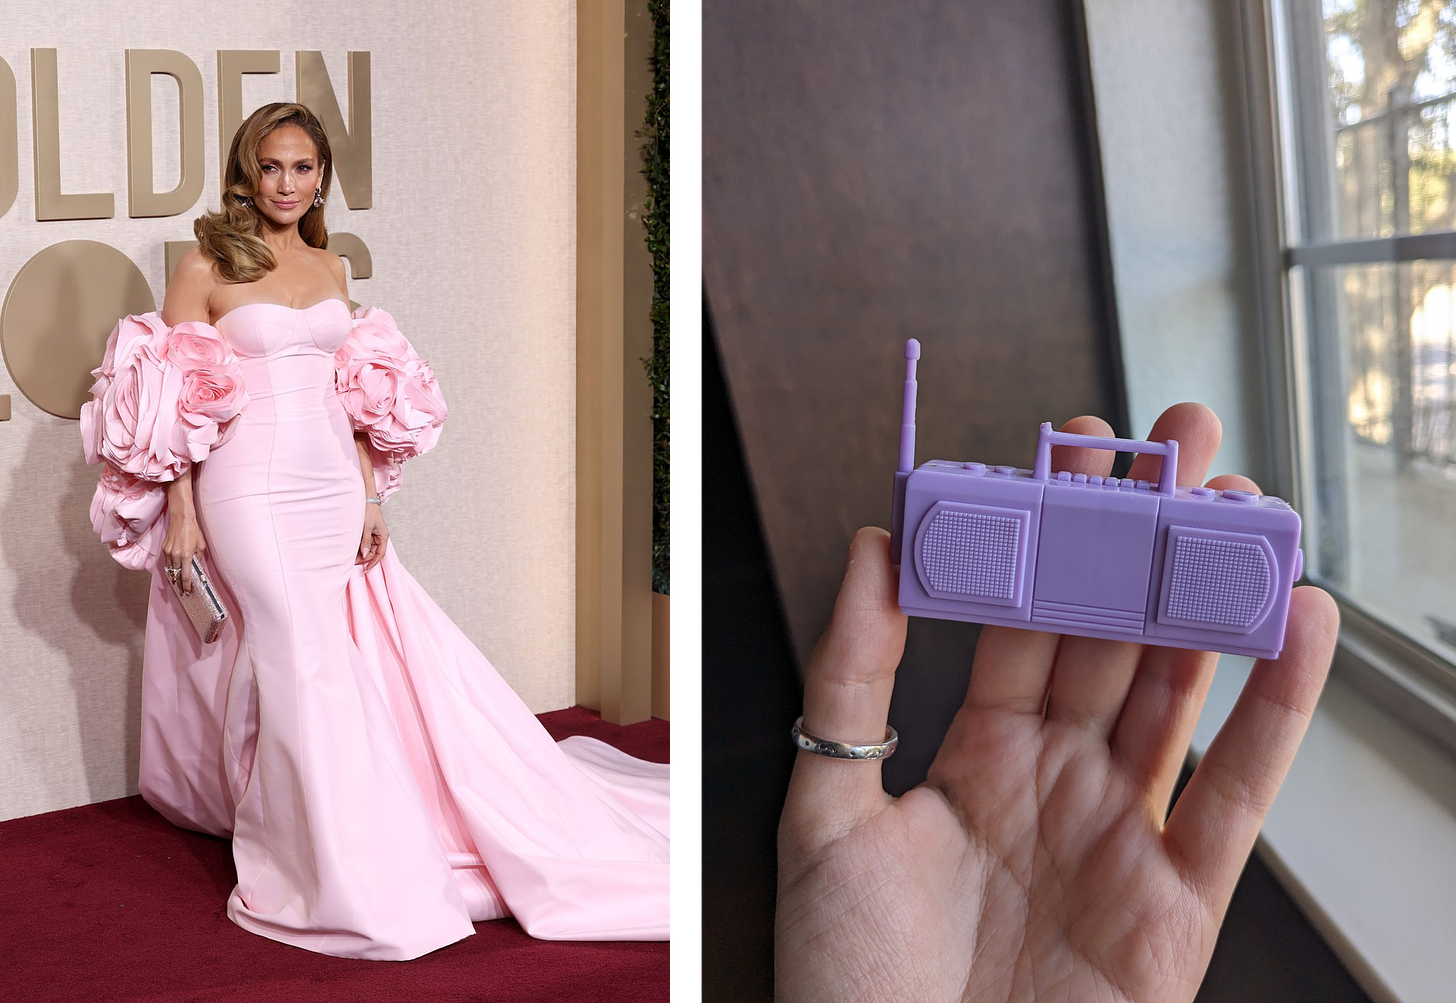 Left: Jennifer Lopez in a light pink puffy off-the-shoulder dress. Right: a purple plastic mini boombox.